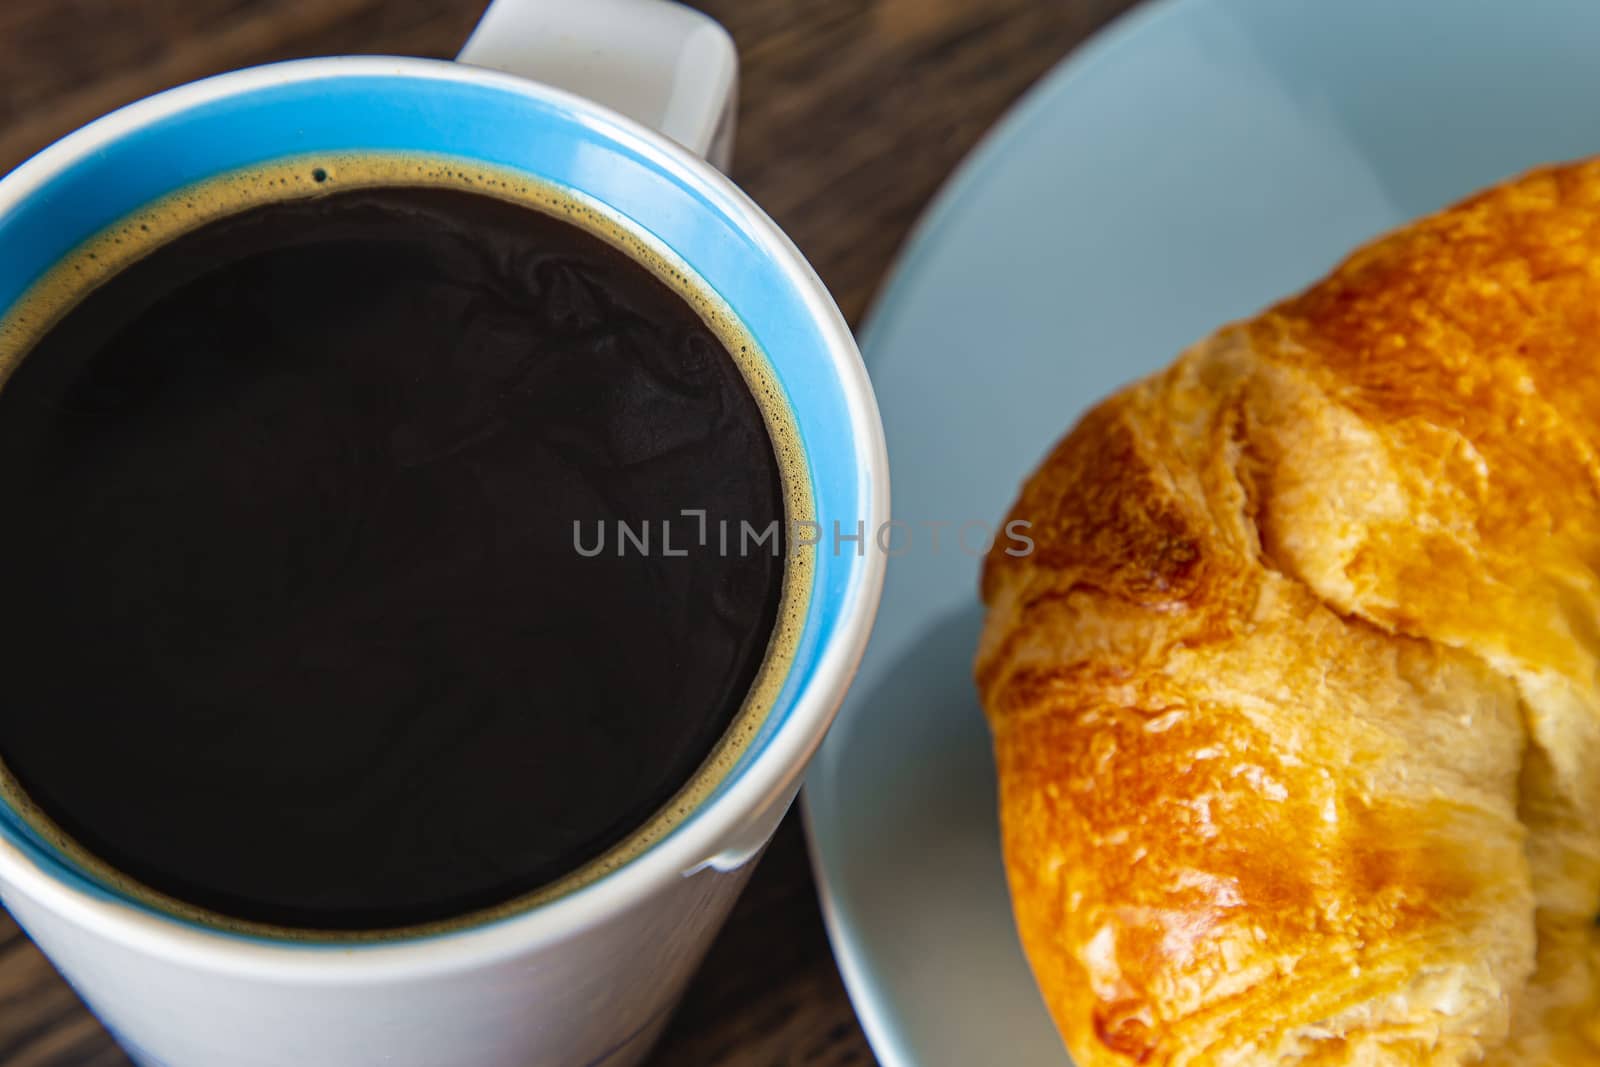 Close up of a coffee cup and a croissant on a blue plate